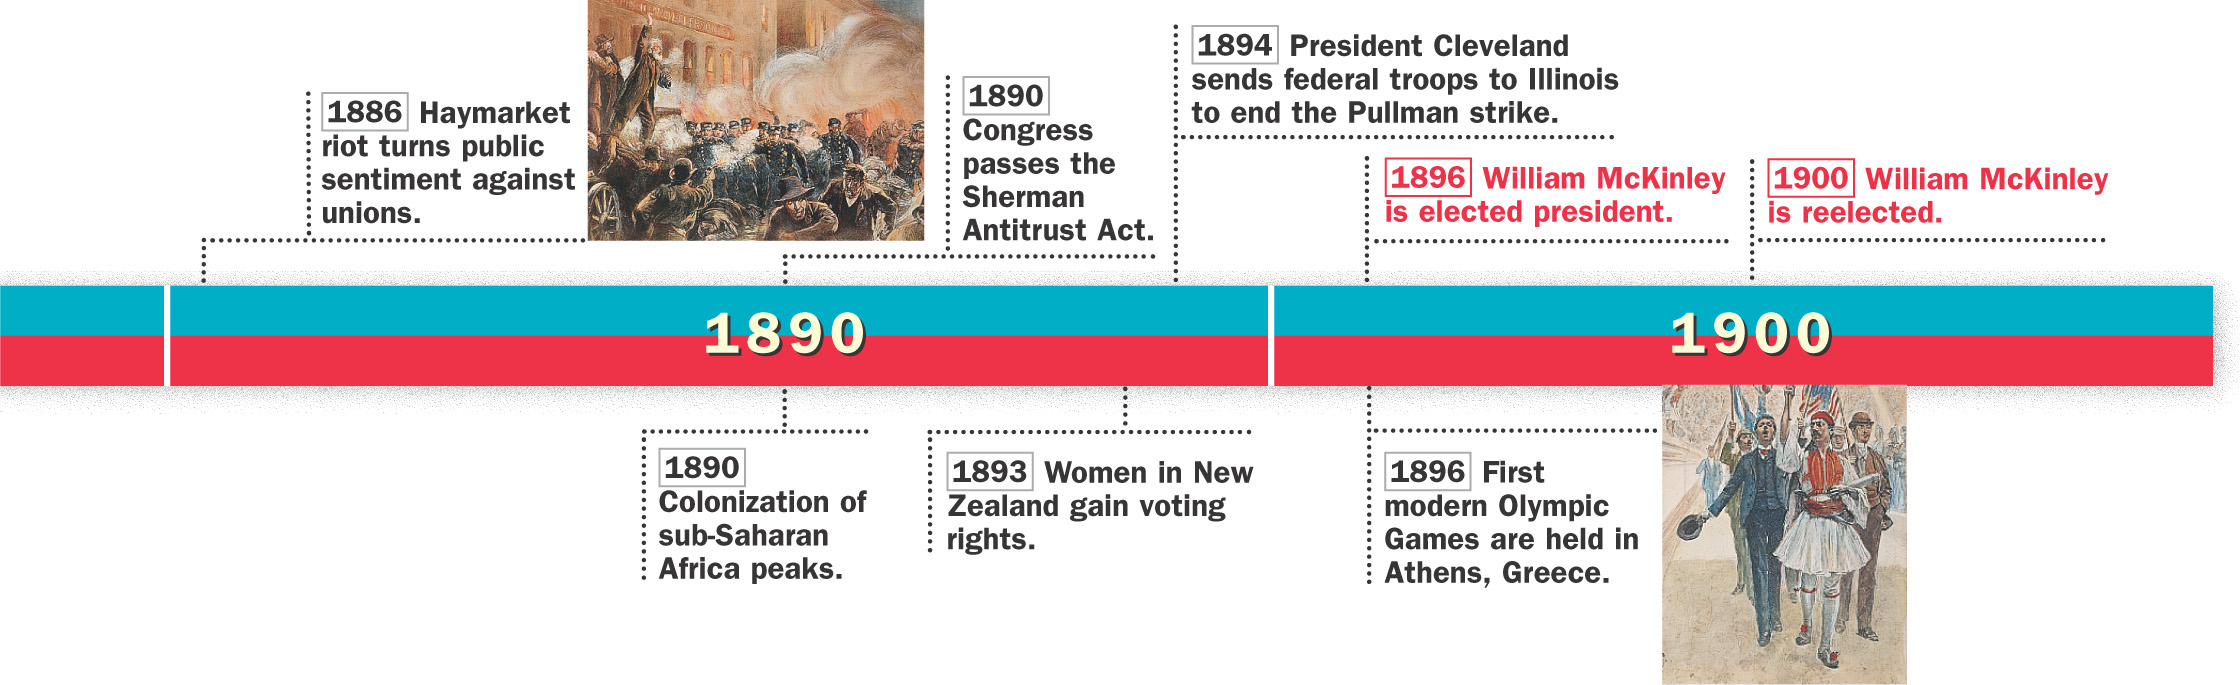 A timeline of historical events from 1869 to 1900 in both the U.S. and the world